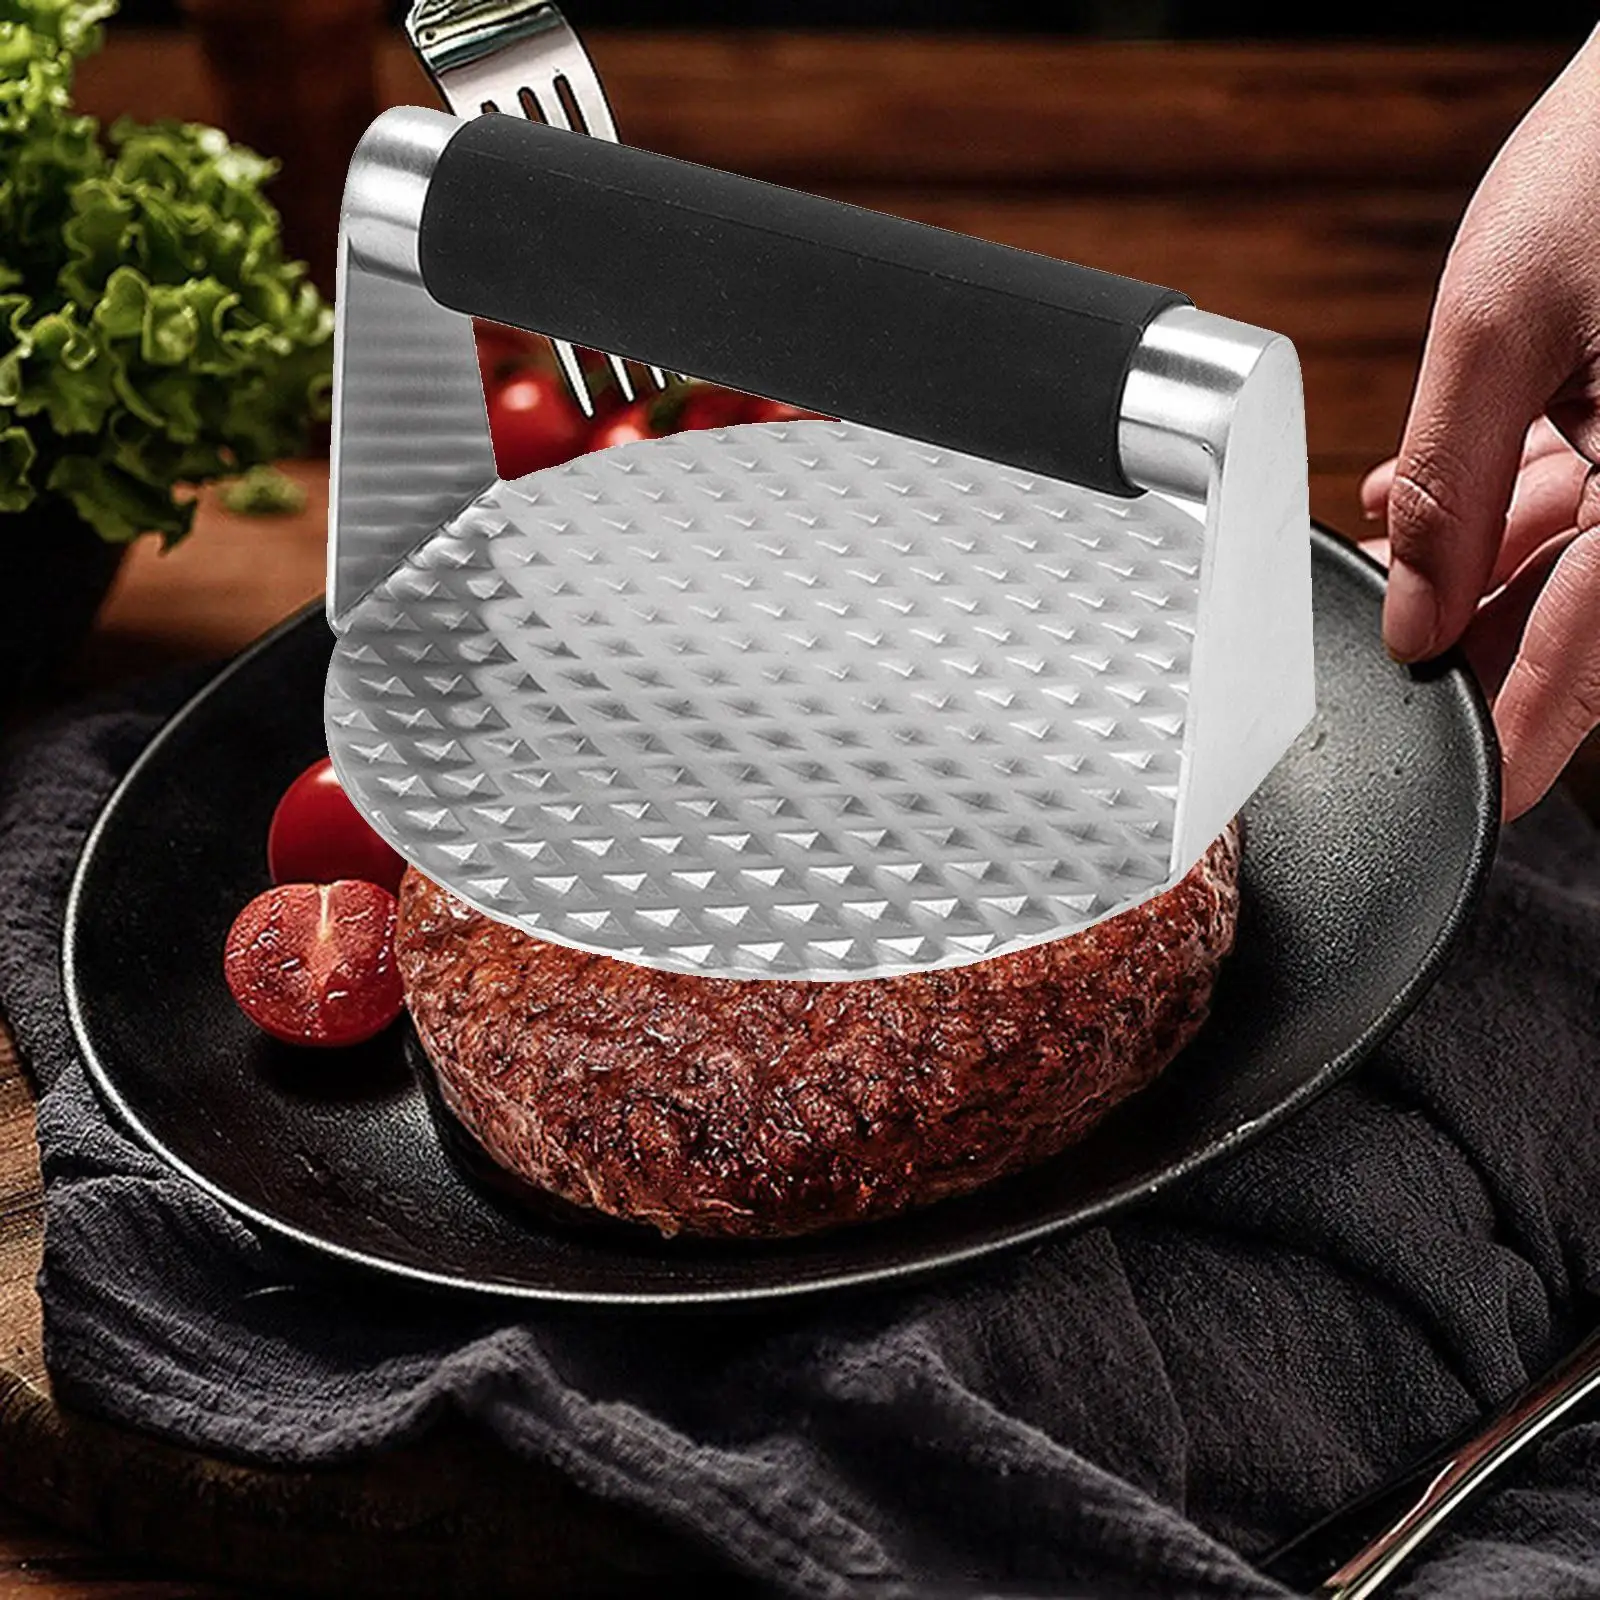 304 Stainless Steel Burger Press Nonstick Kitchen Accessories Hamburger Press Meat Smasher for Grill Meat Beef Steaks Barbecue